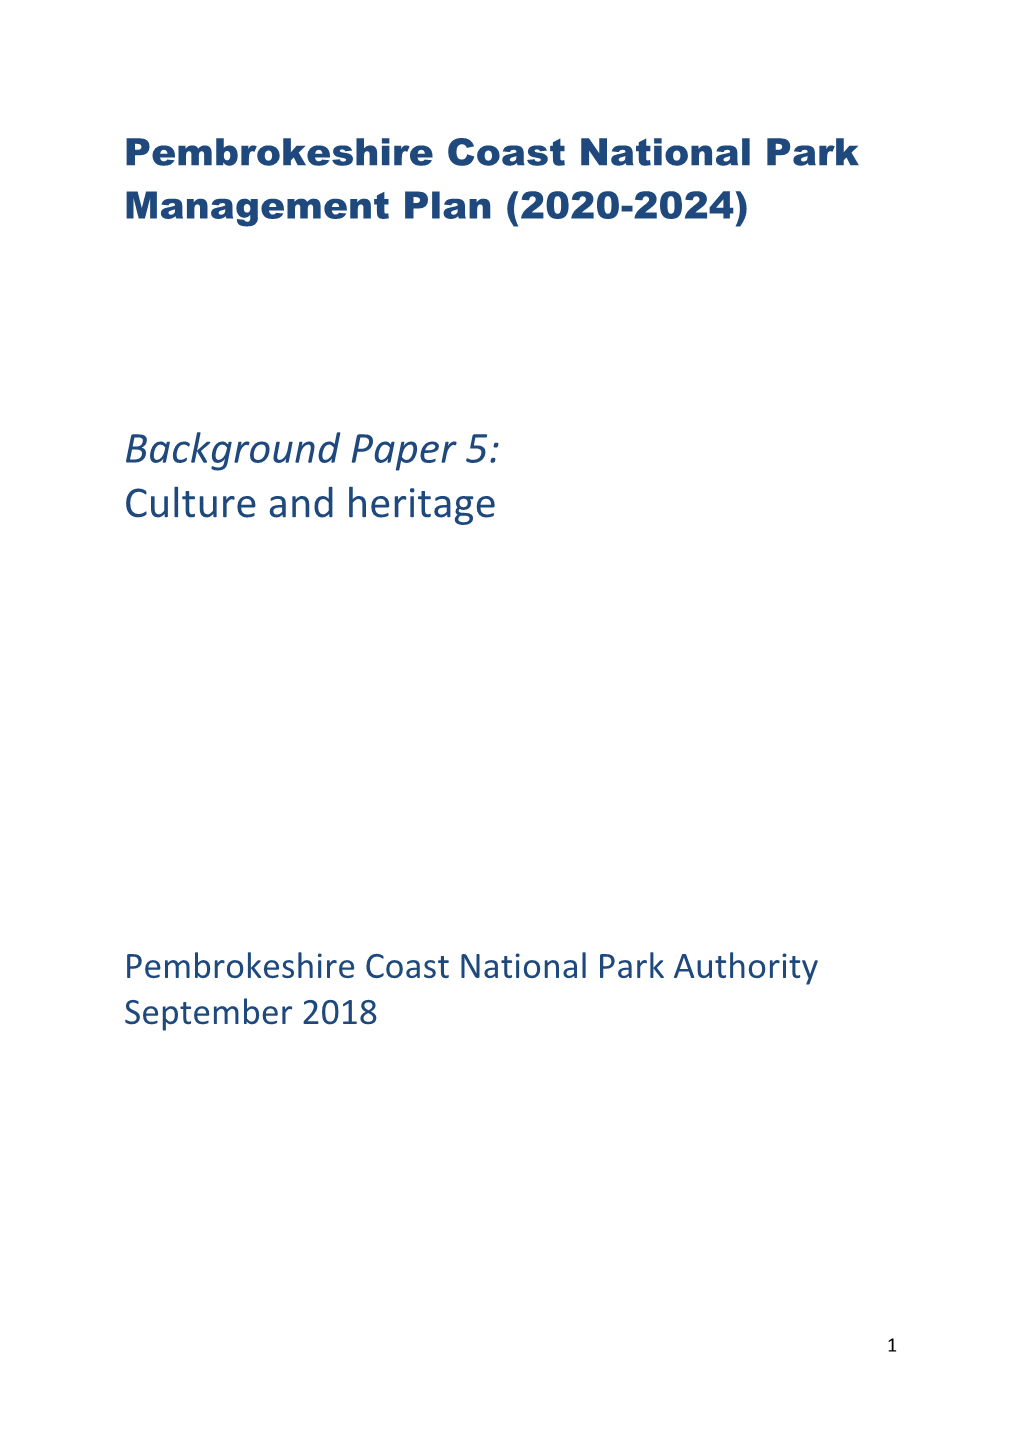 Background Paper 5: Culture and Heritage